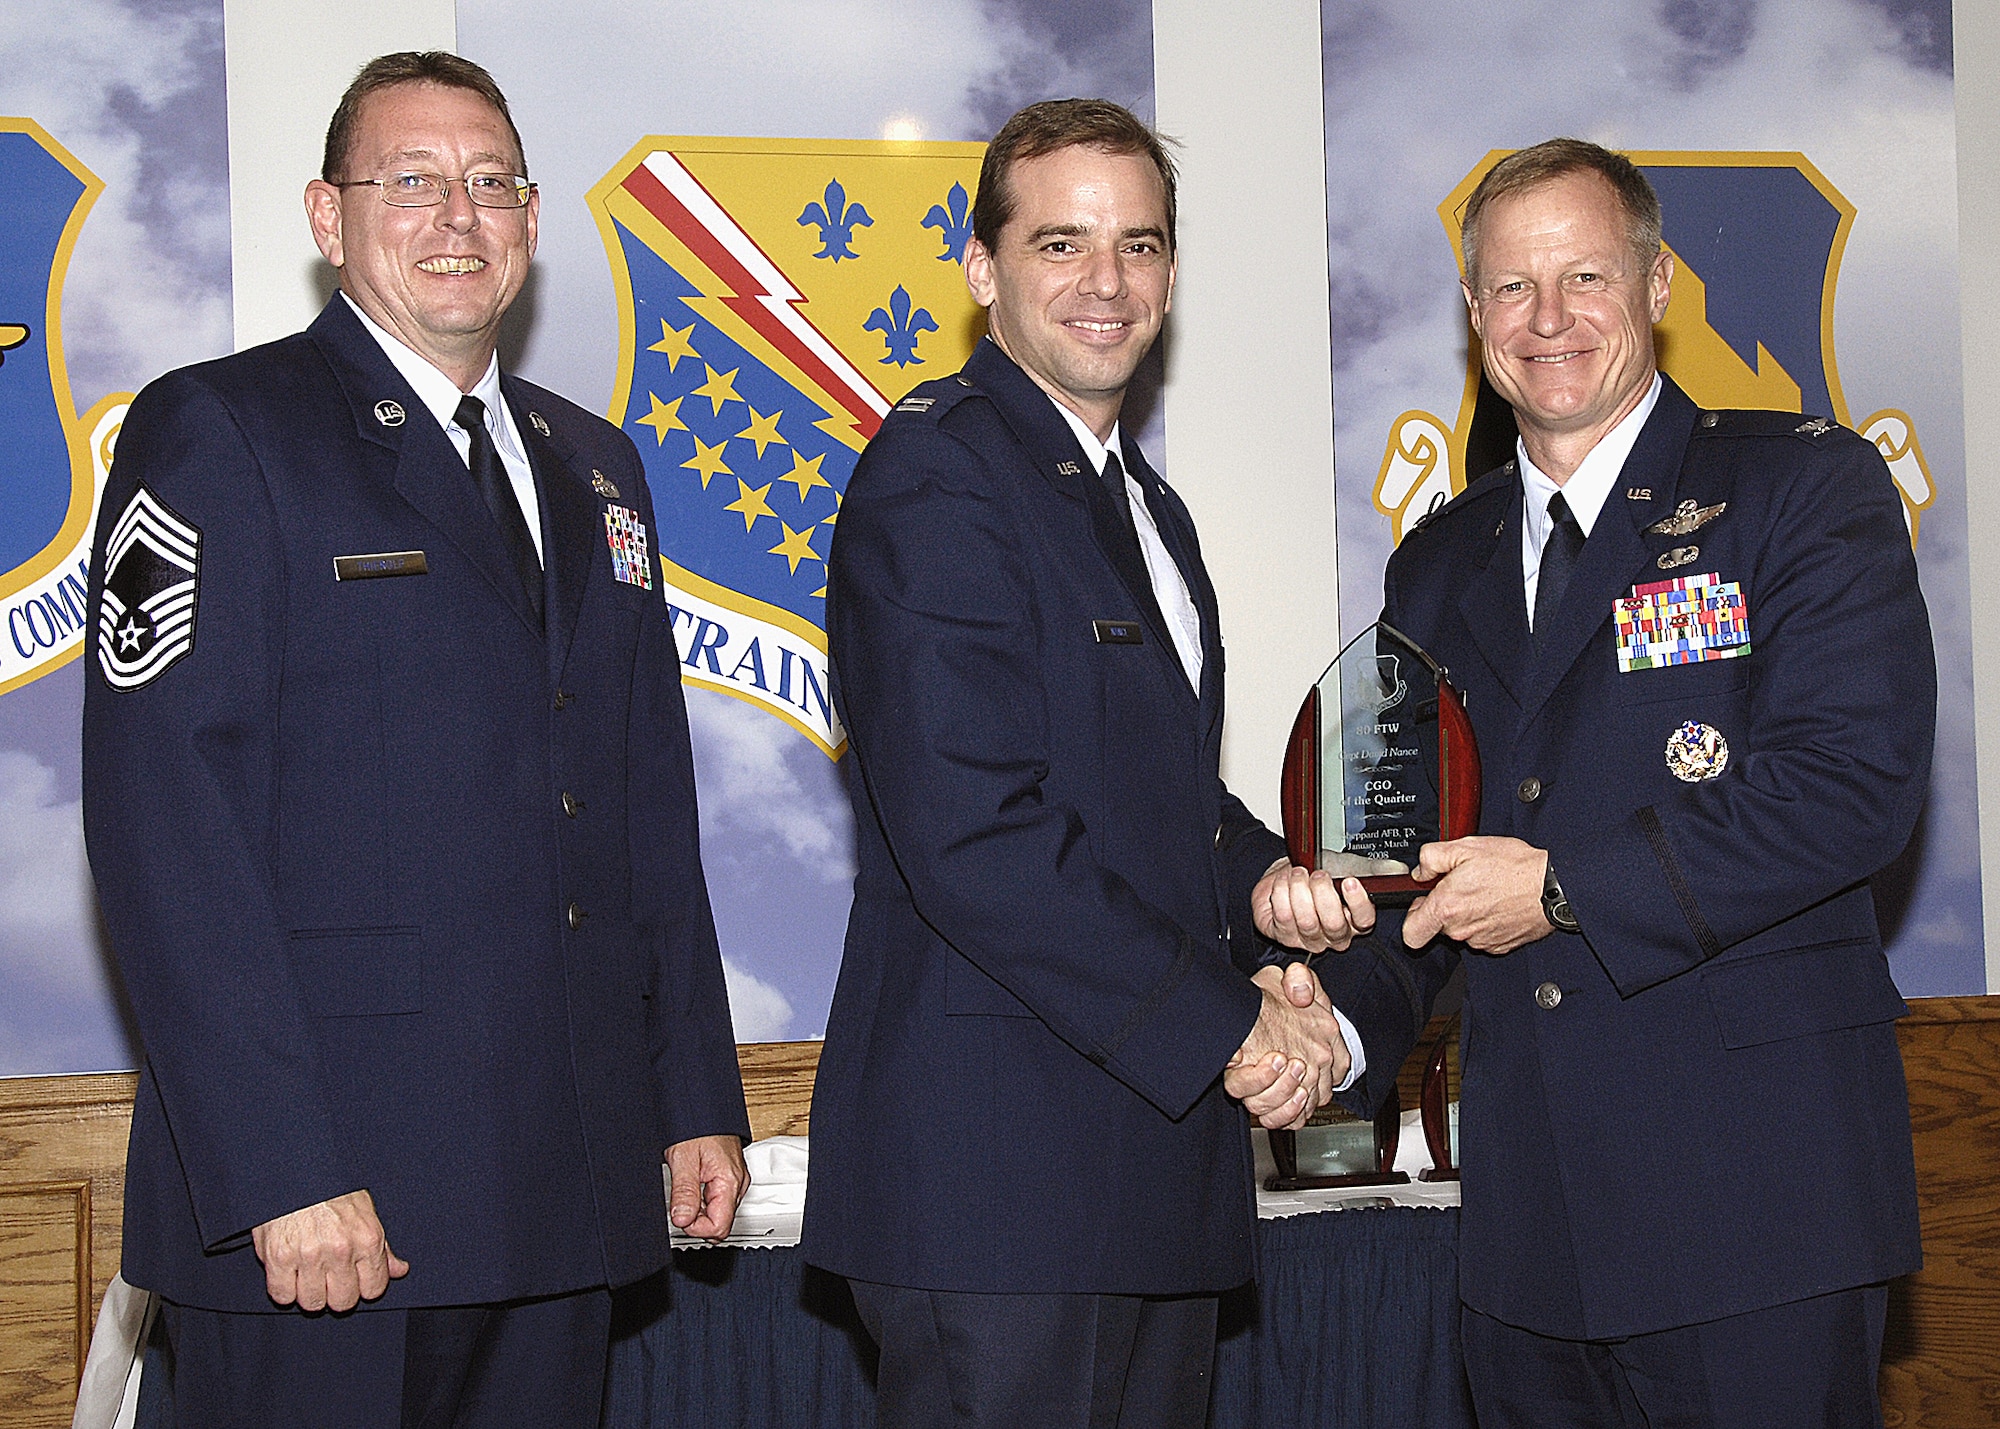 Capt. David Nance, 80th Flying Training Wing, accepts the Company Grade Officer of the Quarter award from 80th FTW Commander Col. David Petersen April 22 during the wing's quarterly award ceremony. Captain Nance was recognized for ensuring pilots' safety through the Bird Aircraft Strike Hazard program and deployment with an Introduction to Fighter Fundamentals squadron for an exercise.. He is also working on a Masters of Aerospace Science degree. Also pictured is 80th FTW Superintendent Chief Master Sgt. Norman Theirolf. (U.S. Air Force photos/Harry Tonemah)